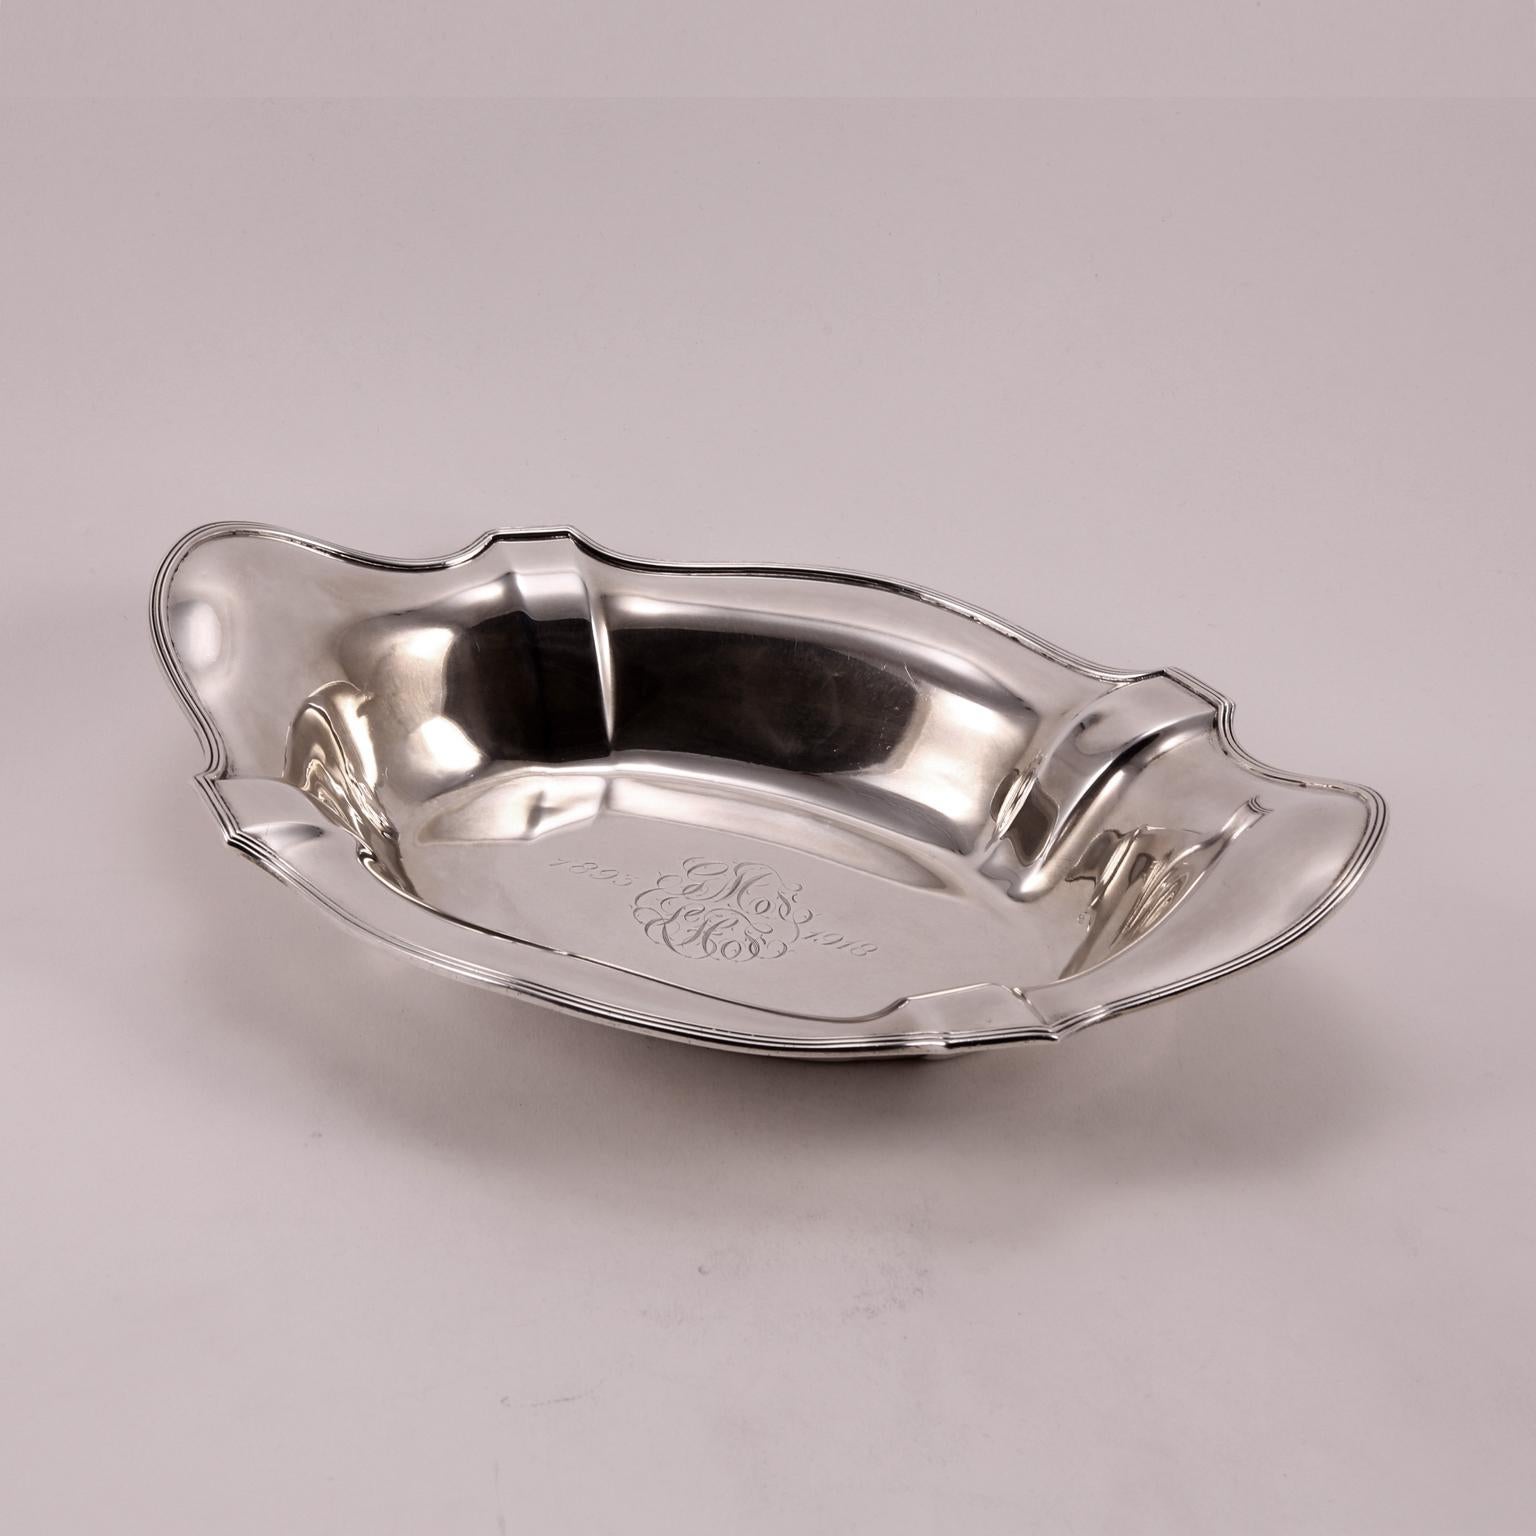 Early 20th Century Gorham Handcrafted Sterling Silver Oval Bowl im Zustand „Gut“ im Angebot in Florence, IT